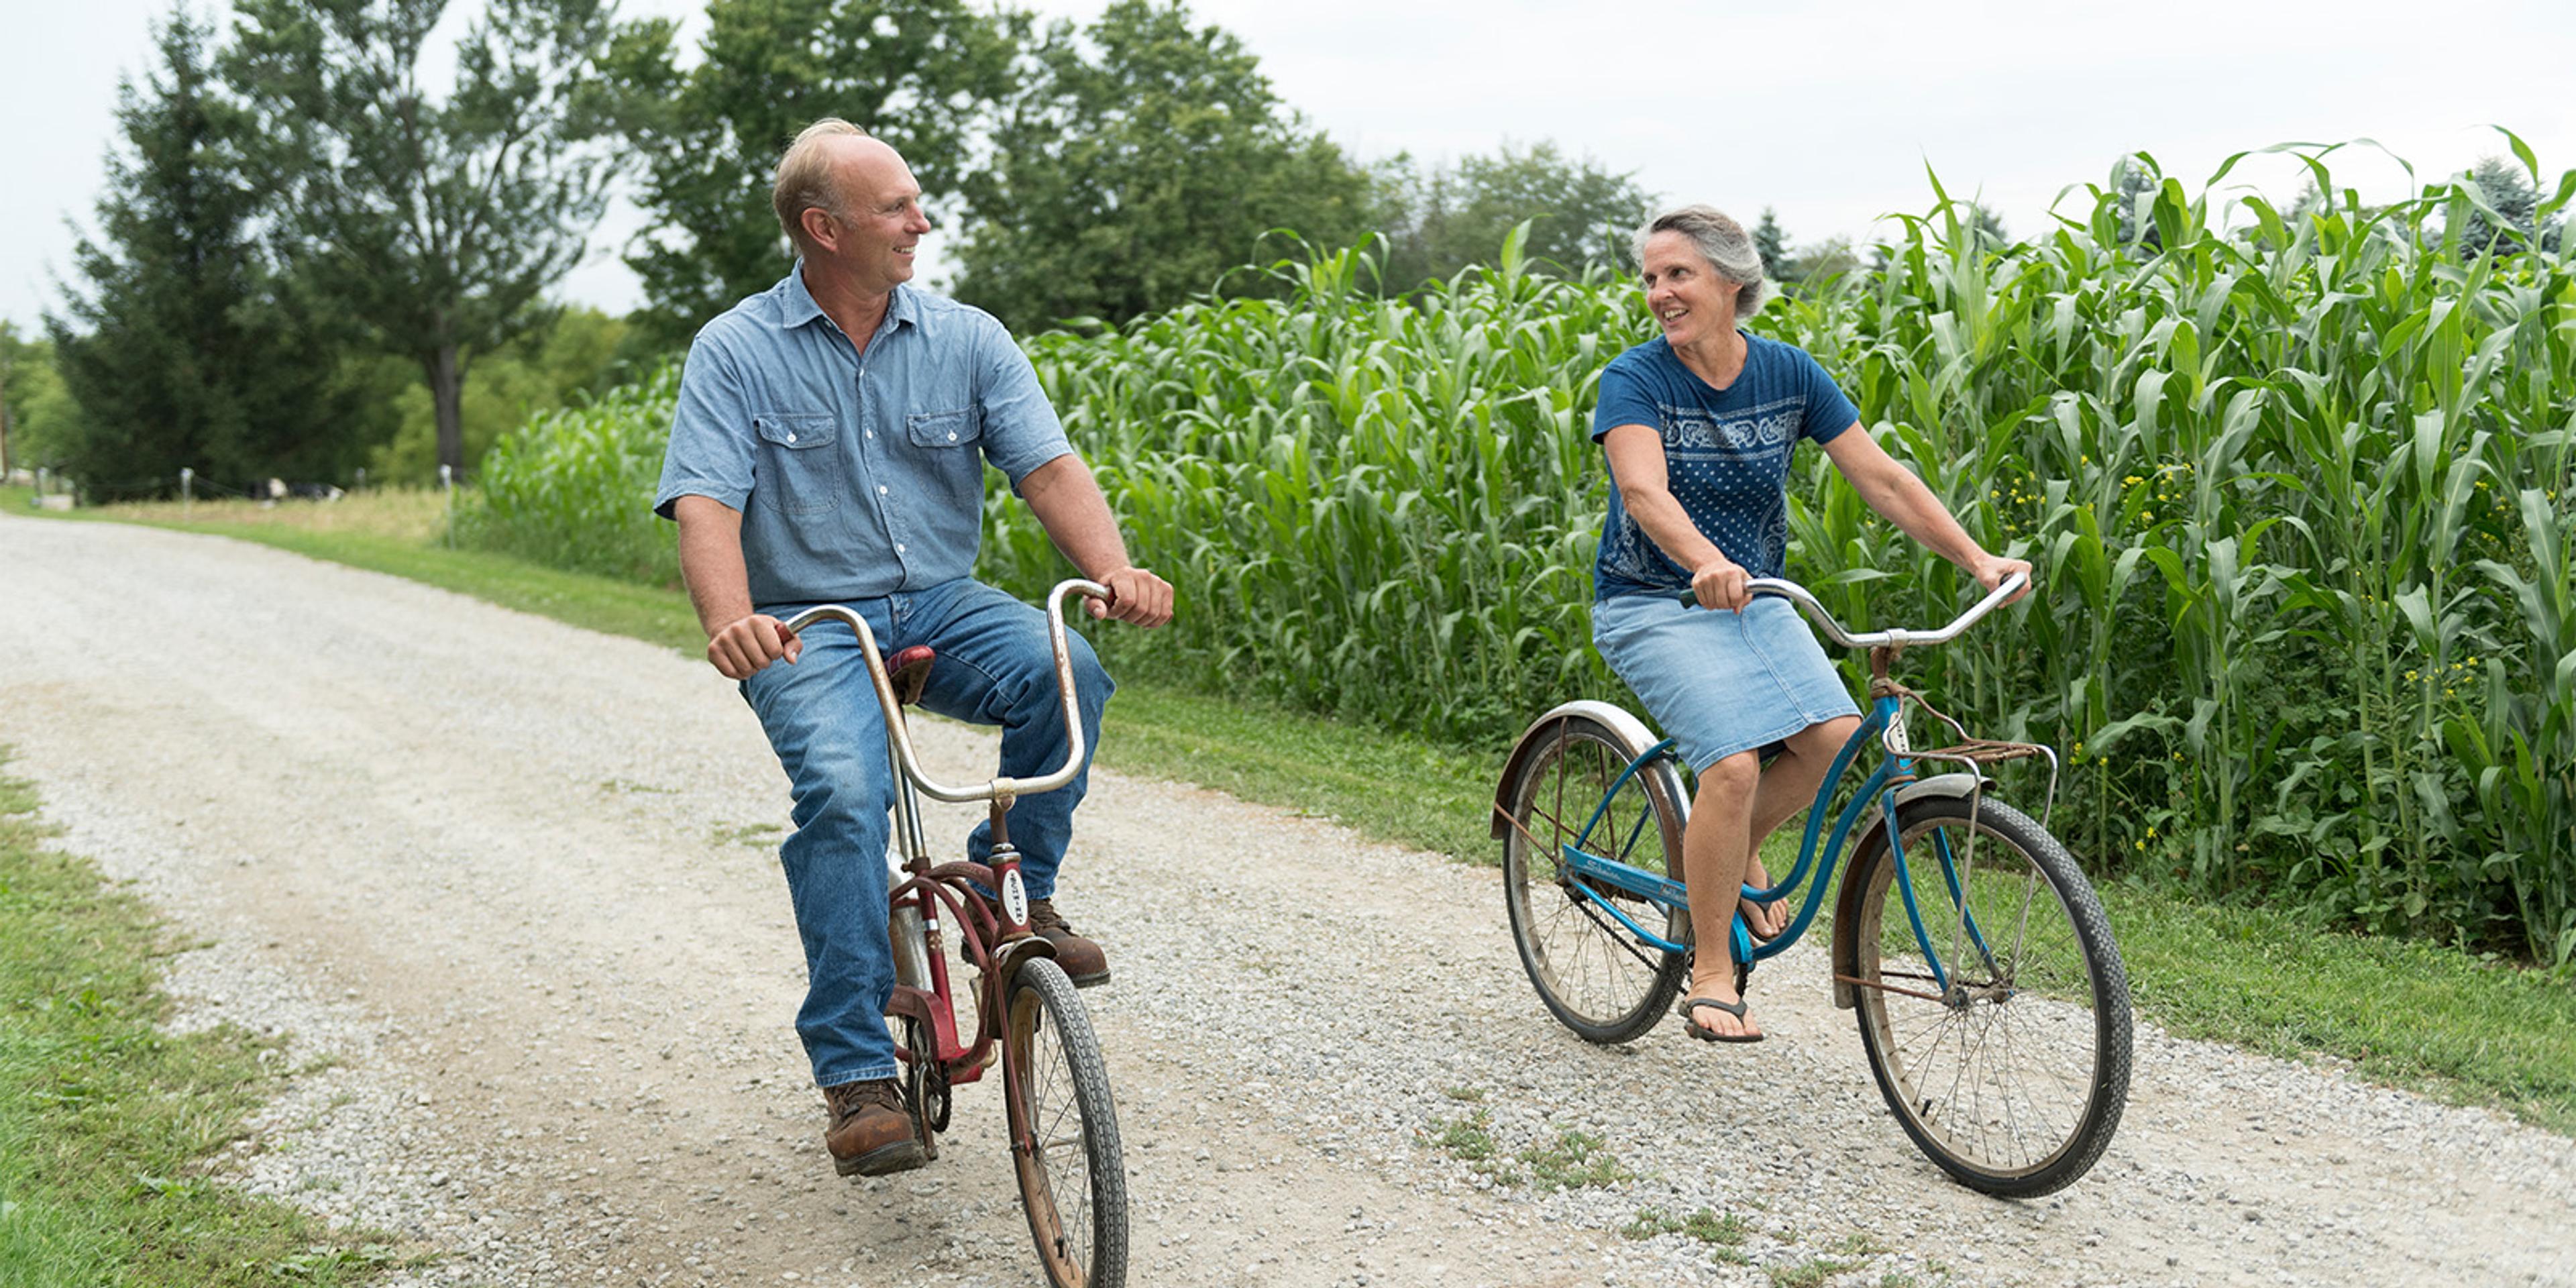 Jim and Janice Gasser ride bikes by a field of corn on their organic dairy farm.